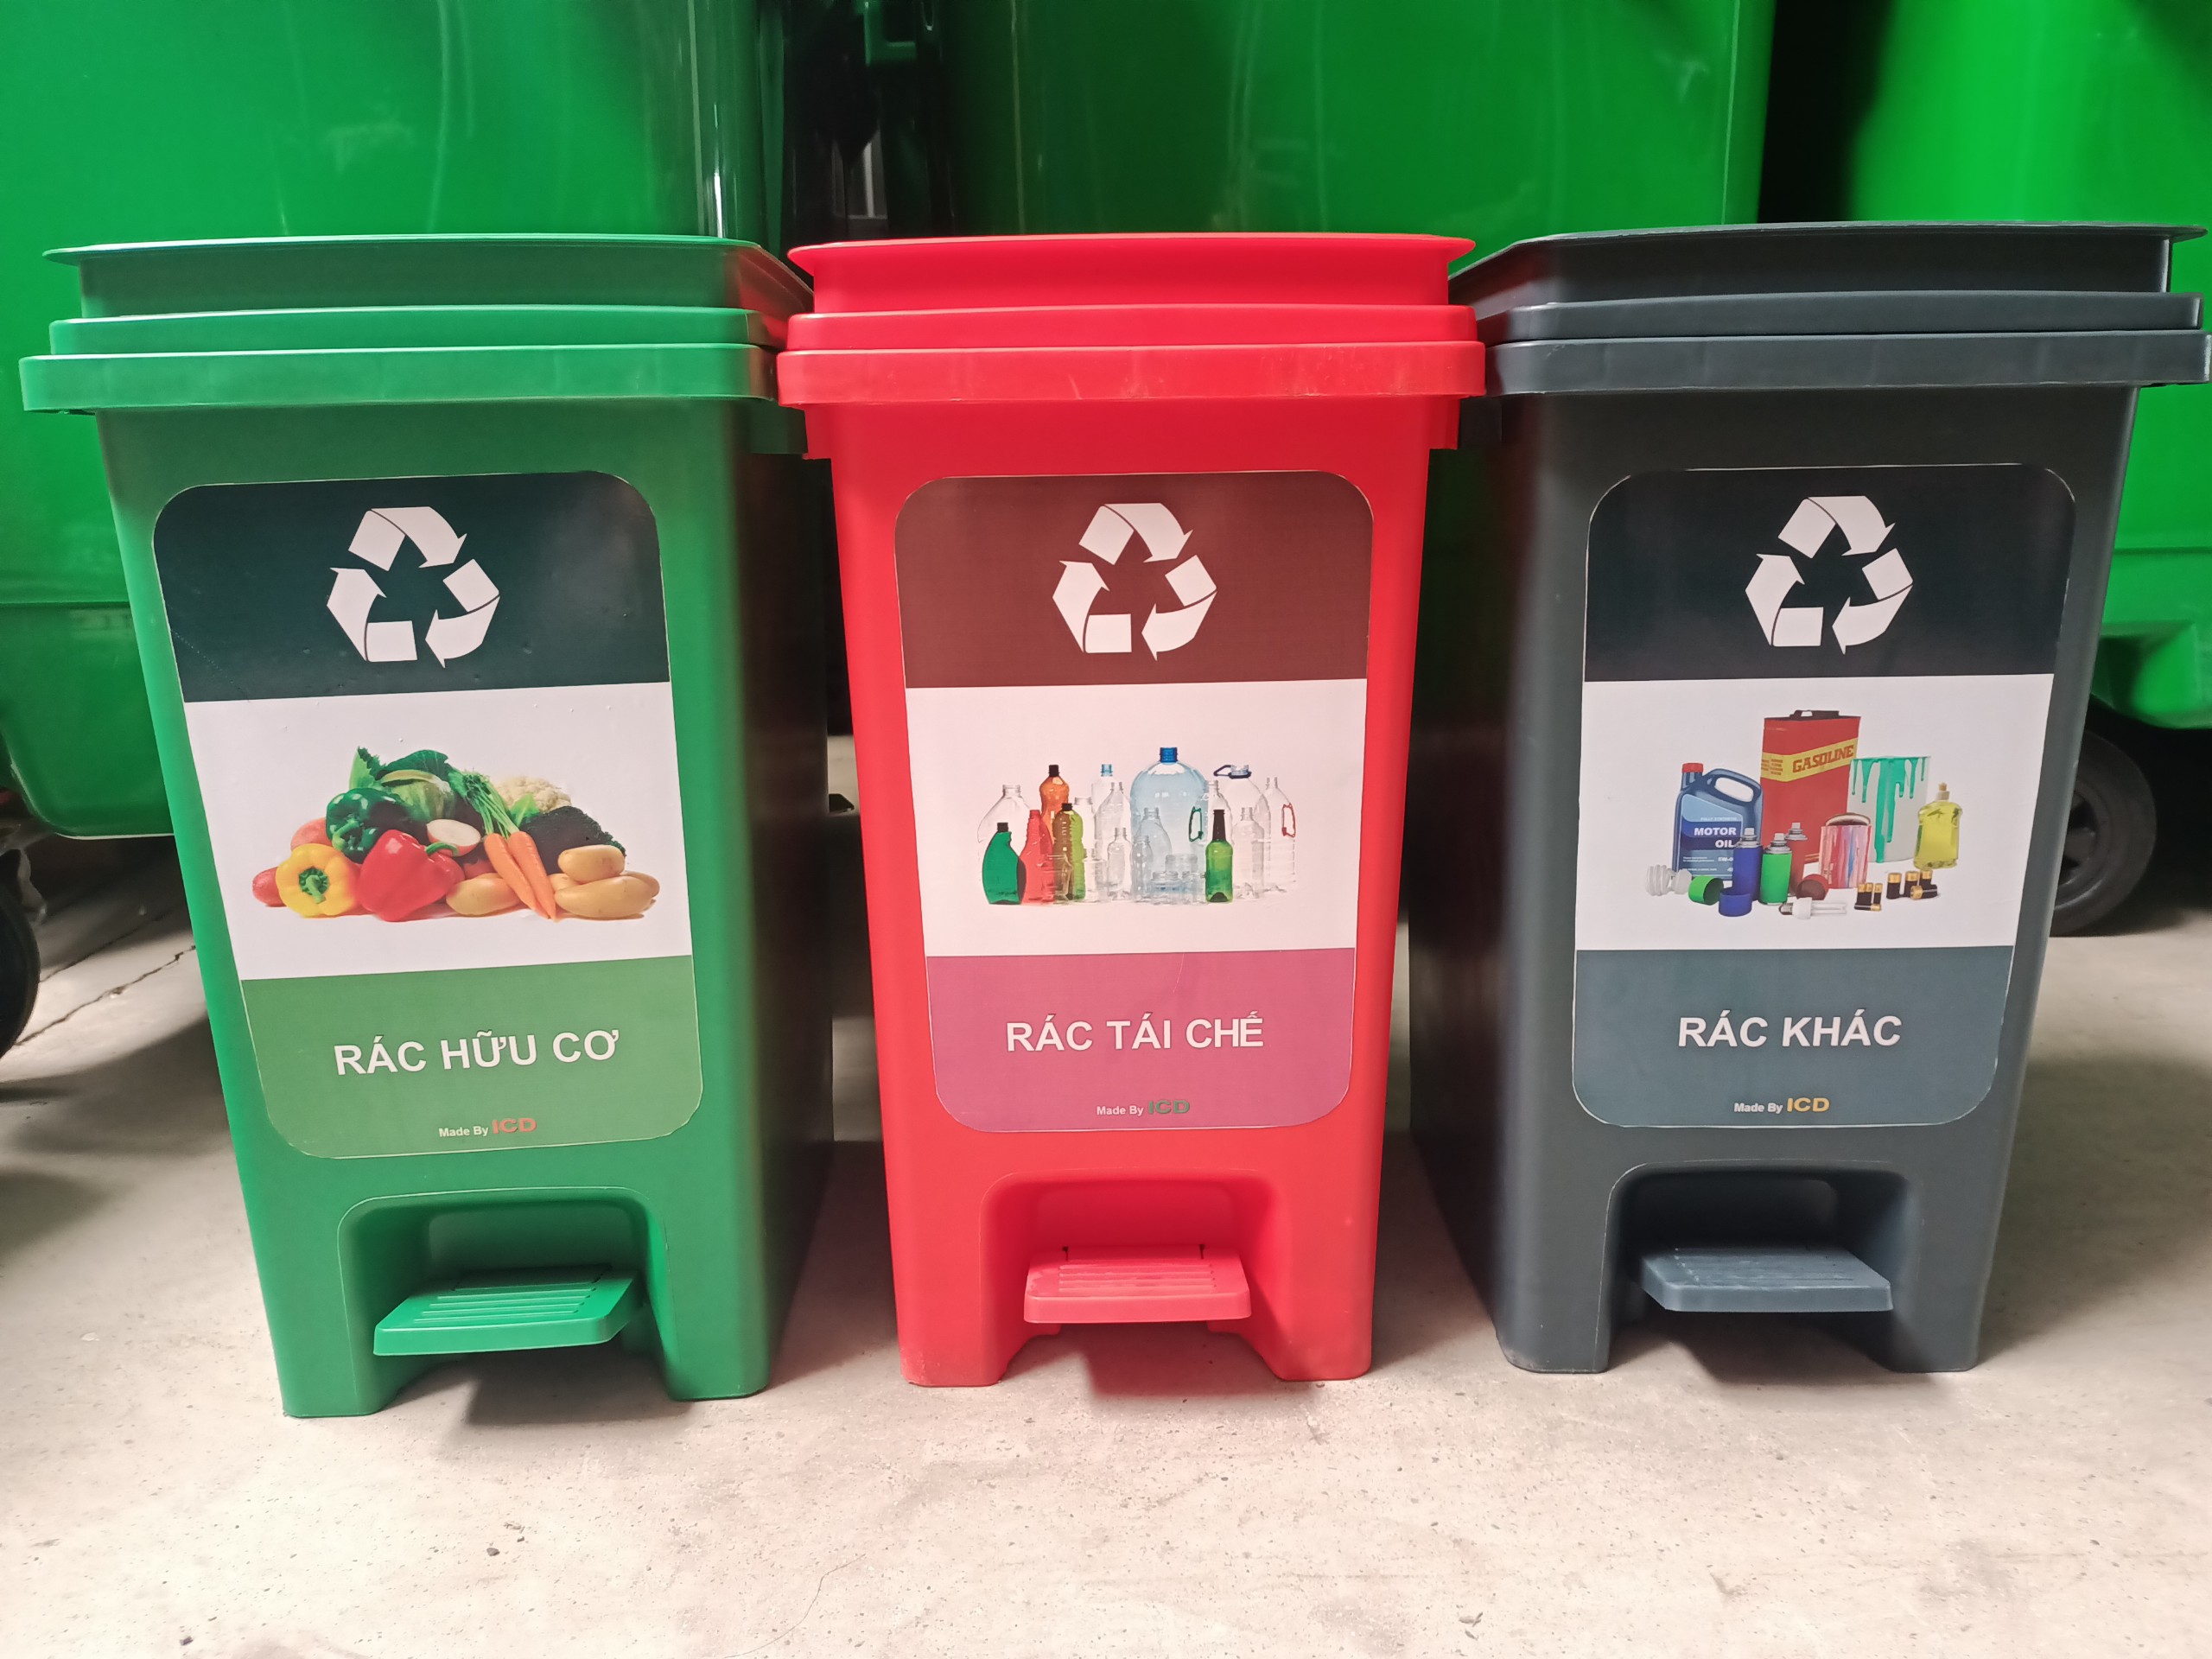 The Ministry of Natural Resources and Environment to provide technical guidance on domestic solid waste treatment in Vietnam